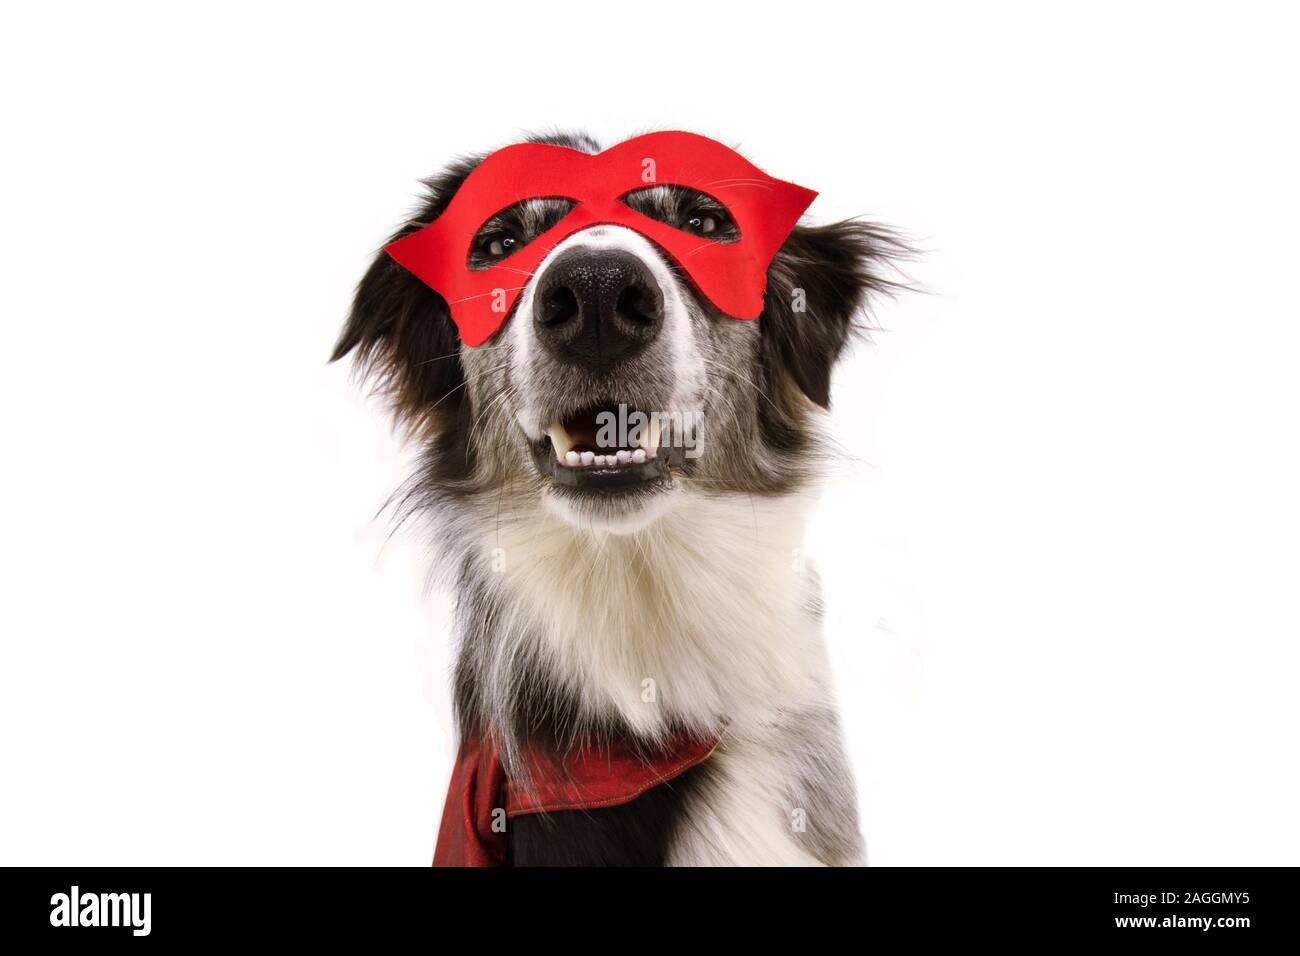 dog pet costume hero red mask and cape costume. carnival or halloween costume. Isolated on white background. Stock Photo